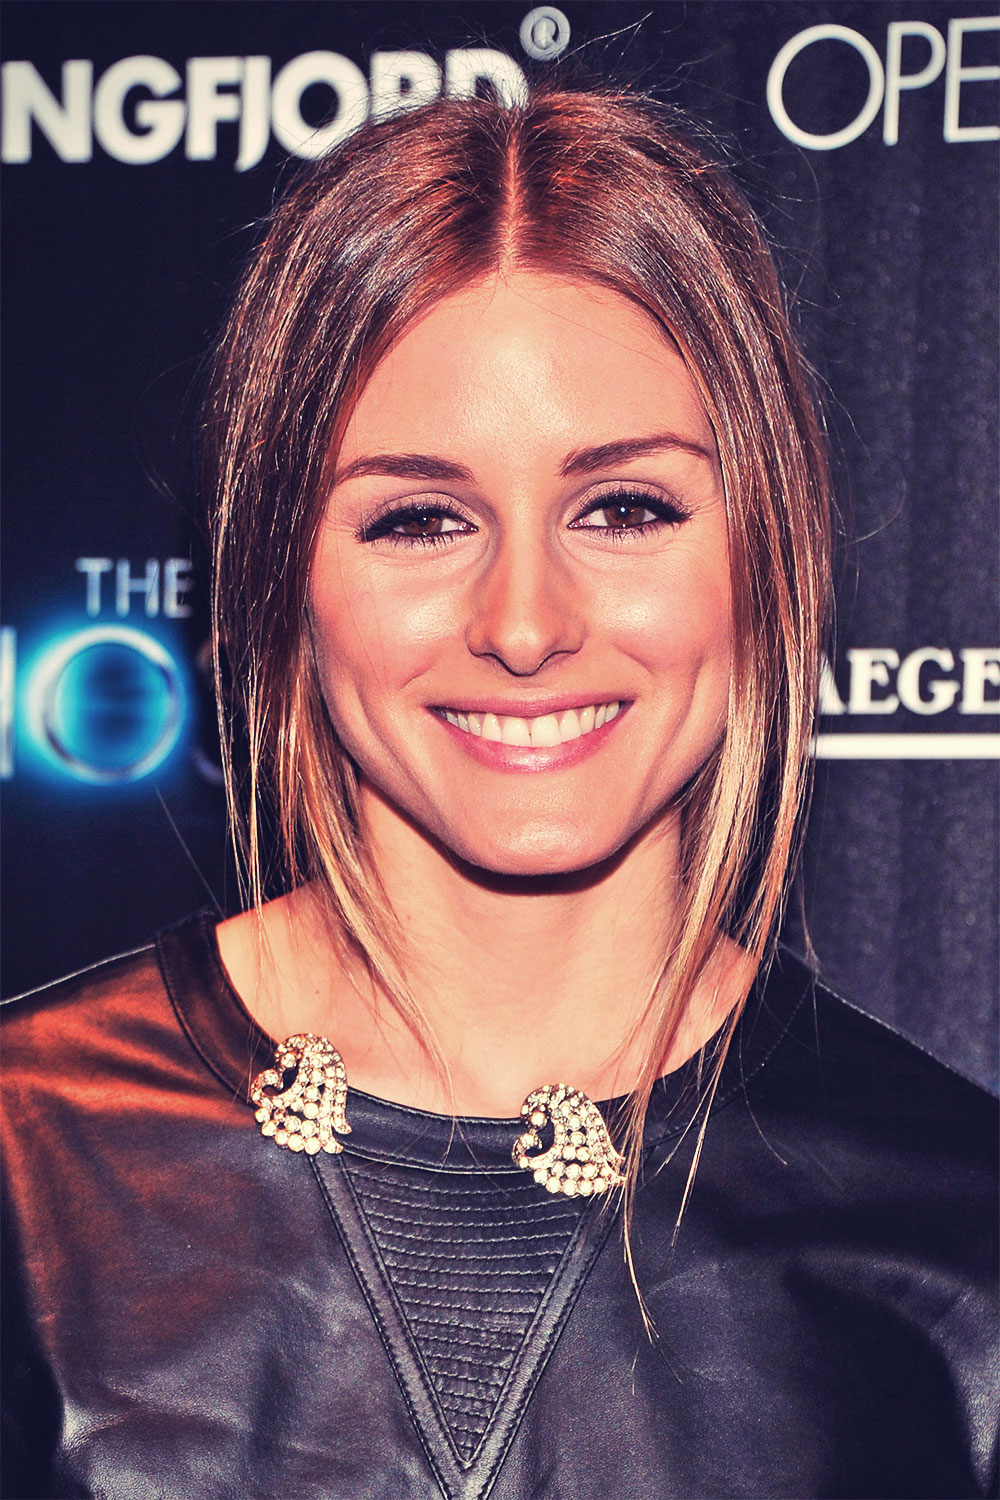 Olivia Palermo attends The Host screening